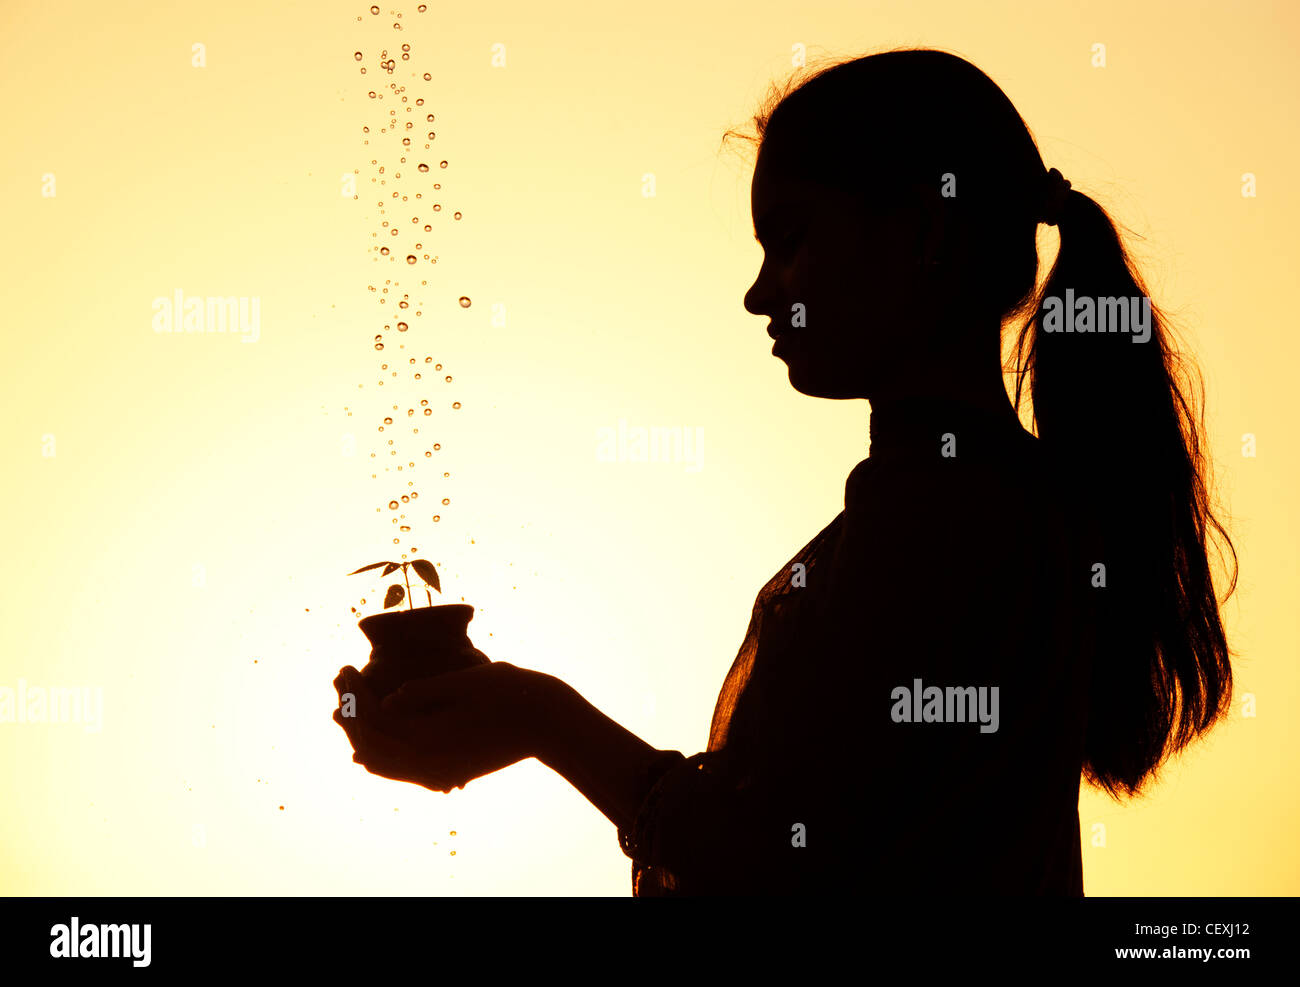 Indian teenage girl holding a plant seedling in a clay pot with water being poured over it. Silhouette. India Stock Photo